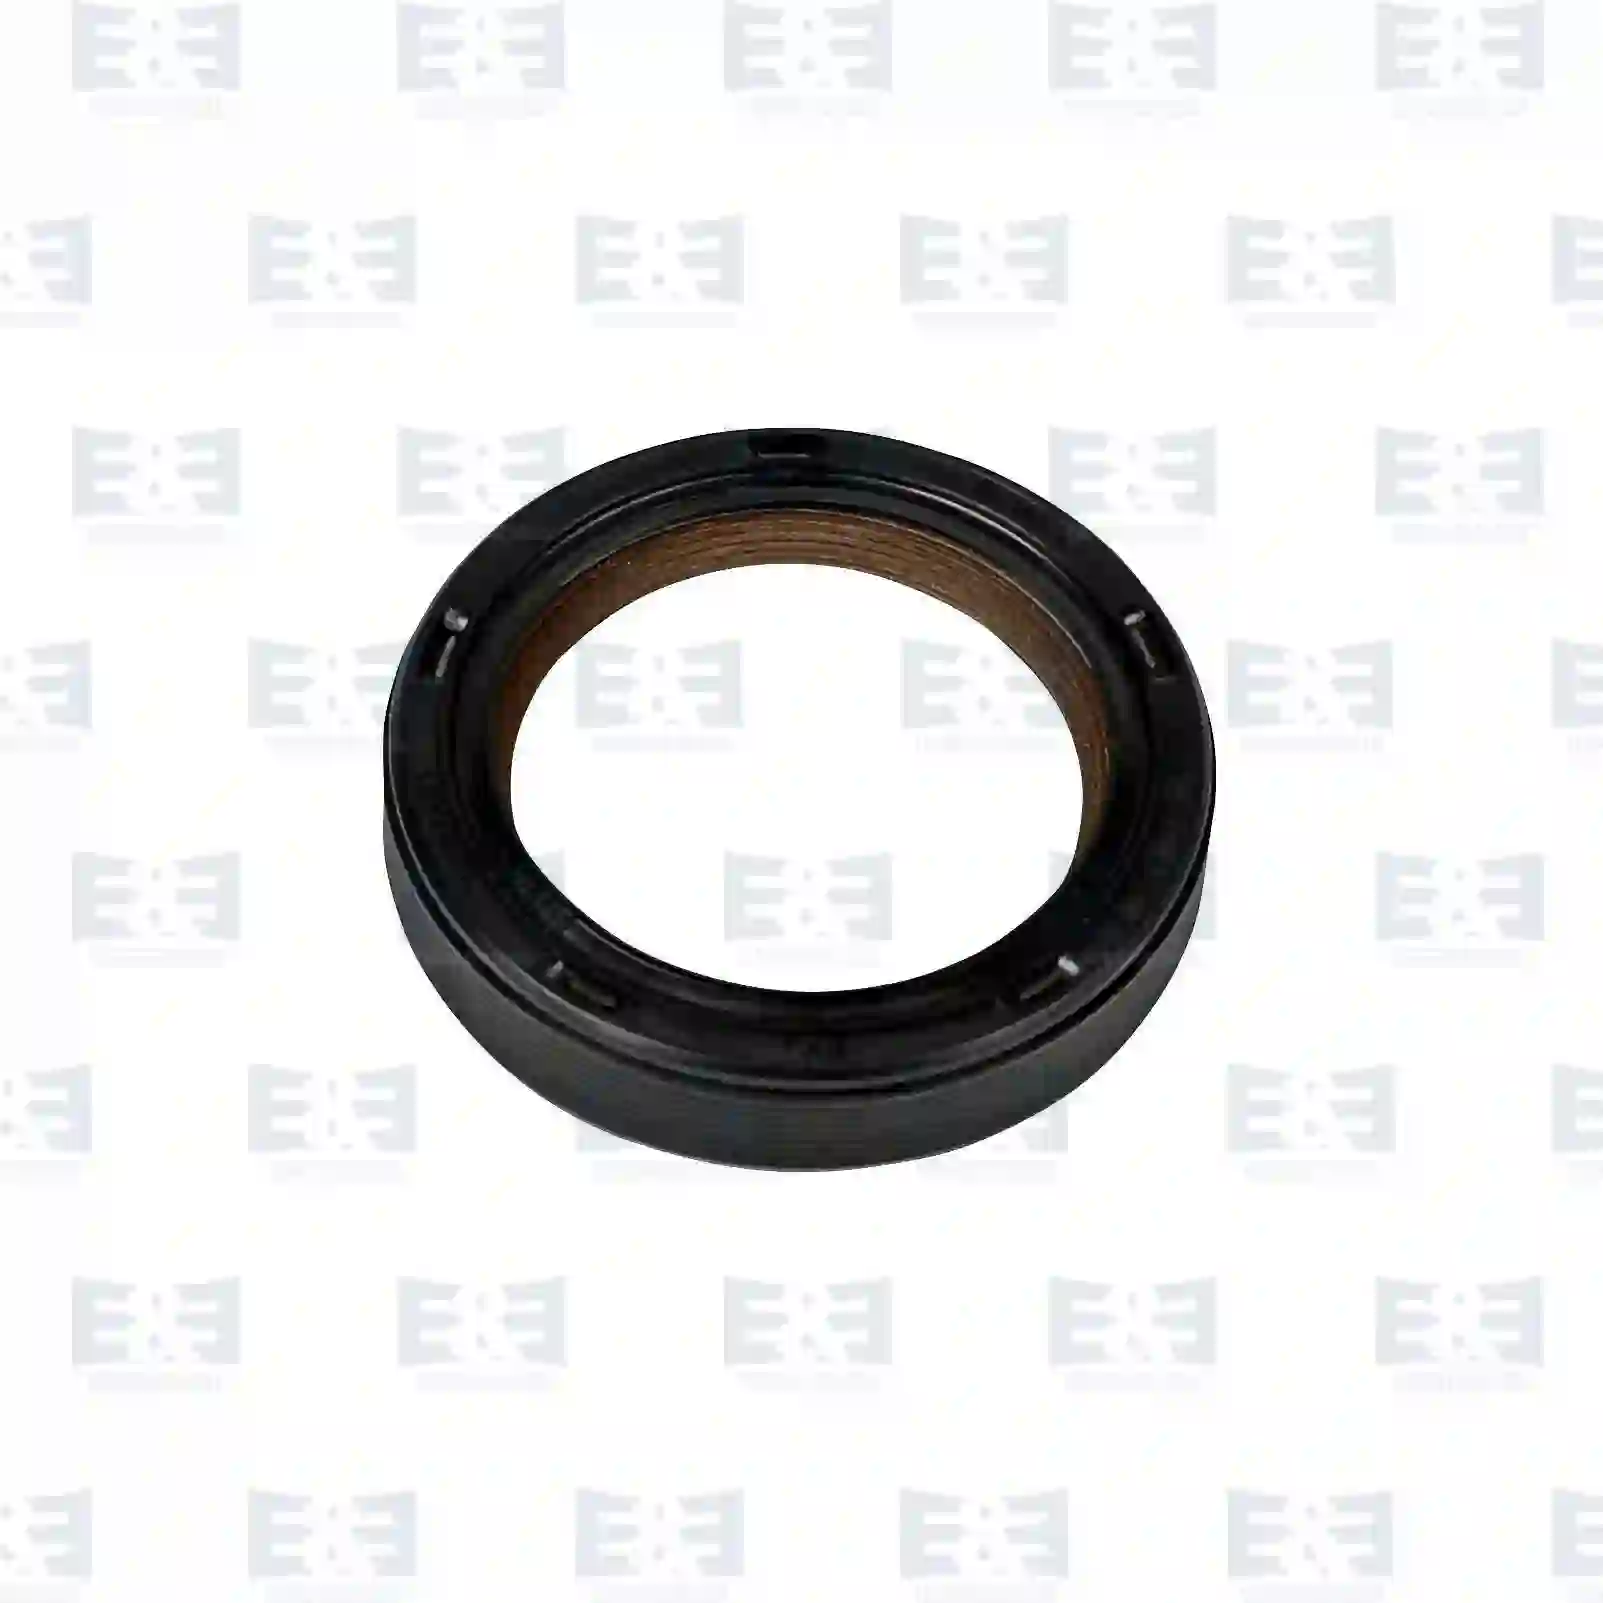 Oil seal, 2E2206056, 038103085, 038103085B, 038103085E, 03G103295D, 03G105021C, 03G105173, 03G198998F, 06D103151, 06D103151B, 1100691, 1215960, 2M21-6700-AA, MN980009, 95510108500, 038103085, 038103085E, 03D105171B, 038103085E, 038103151, 038103153A, 038103153B, 038103085, 038103085B, 038103085E, 038103151, 038103153A, 038103153B, 03D105171B, 03G103295D, 03G105021C, 03G105173, 03G198998F, 06D103151, 06D103151B, ZG02625-0008 ||  2E2206056 E&E Truck Spare Parts | Truck Spare Parts, Auotomotive Spare Parts Oil seal, 2E2206056, 038103085, 038103085B, 038103085E, 03G103295D, 03G105021C, 03G105173, 03G198998F, 06D103151, 06D103151B, 1100691, 1215960, 2M21-6700-AA, MN980009, 95510108500, 038103085, 038103085E, 03D105171B, 038103085E, 038103151, 038103153A, 038103153B, 038103085, 038103085B, 038103085E, 038103151, 038103153A, 038103153B, 03D105171B, 03G103295D, 03G105021C, 03G105173, 03G198998F, 06D103151, 06D103151B, ZG02625-0008 ||  2E2206056 E&E Truck Spare Parts | Truck Spare Parts, Auotomotive Spare Parts